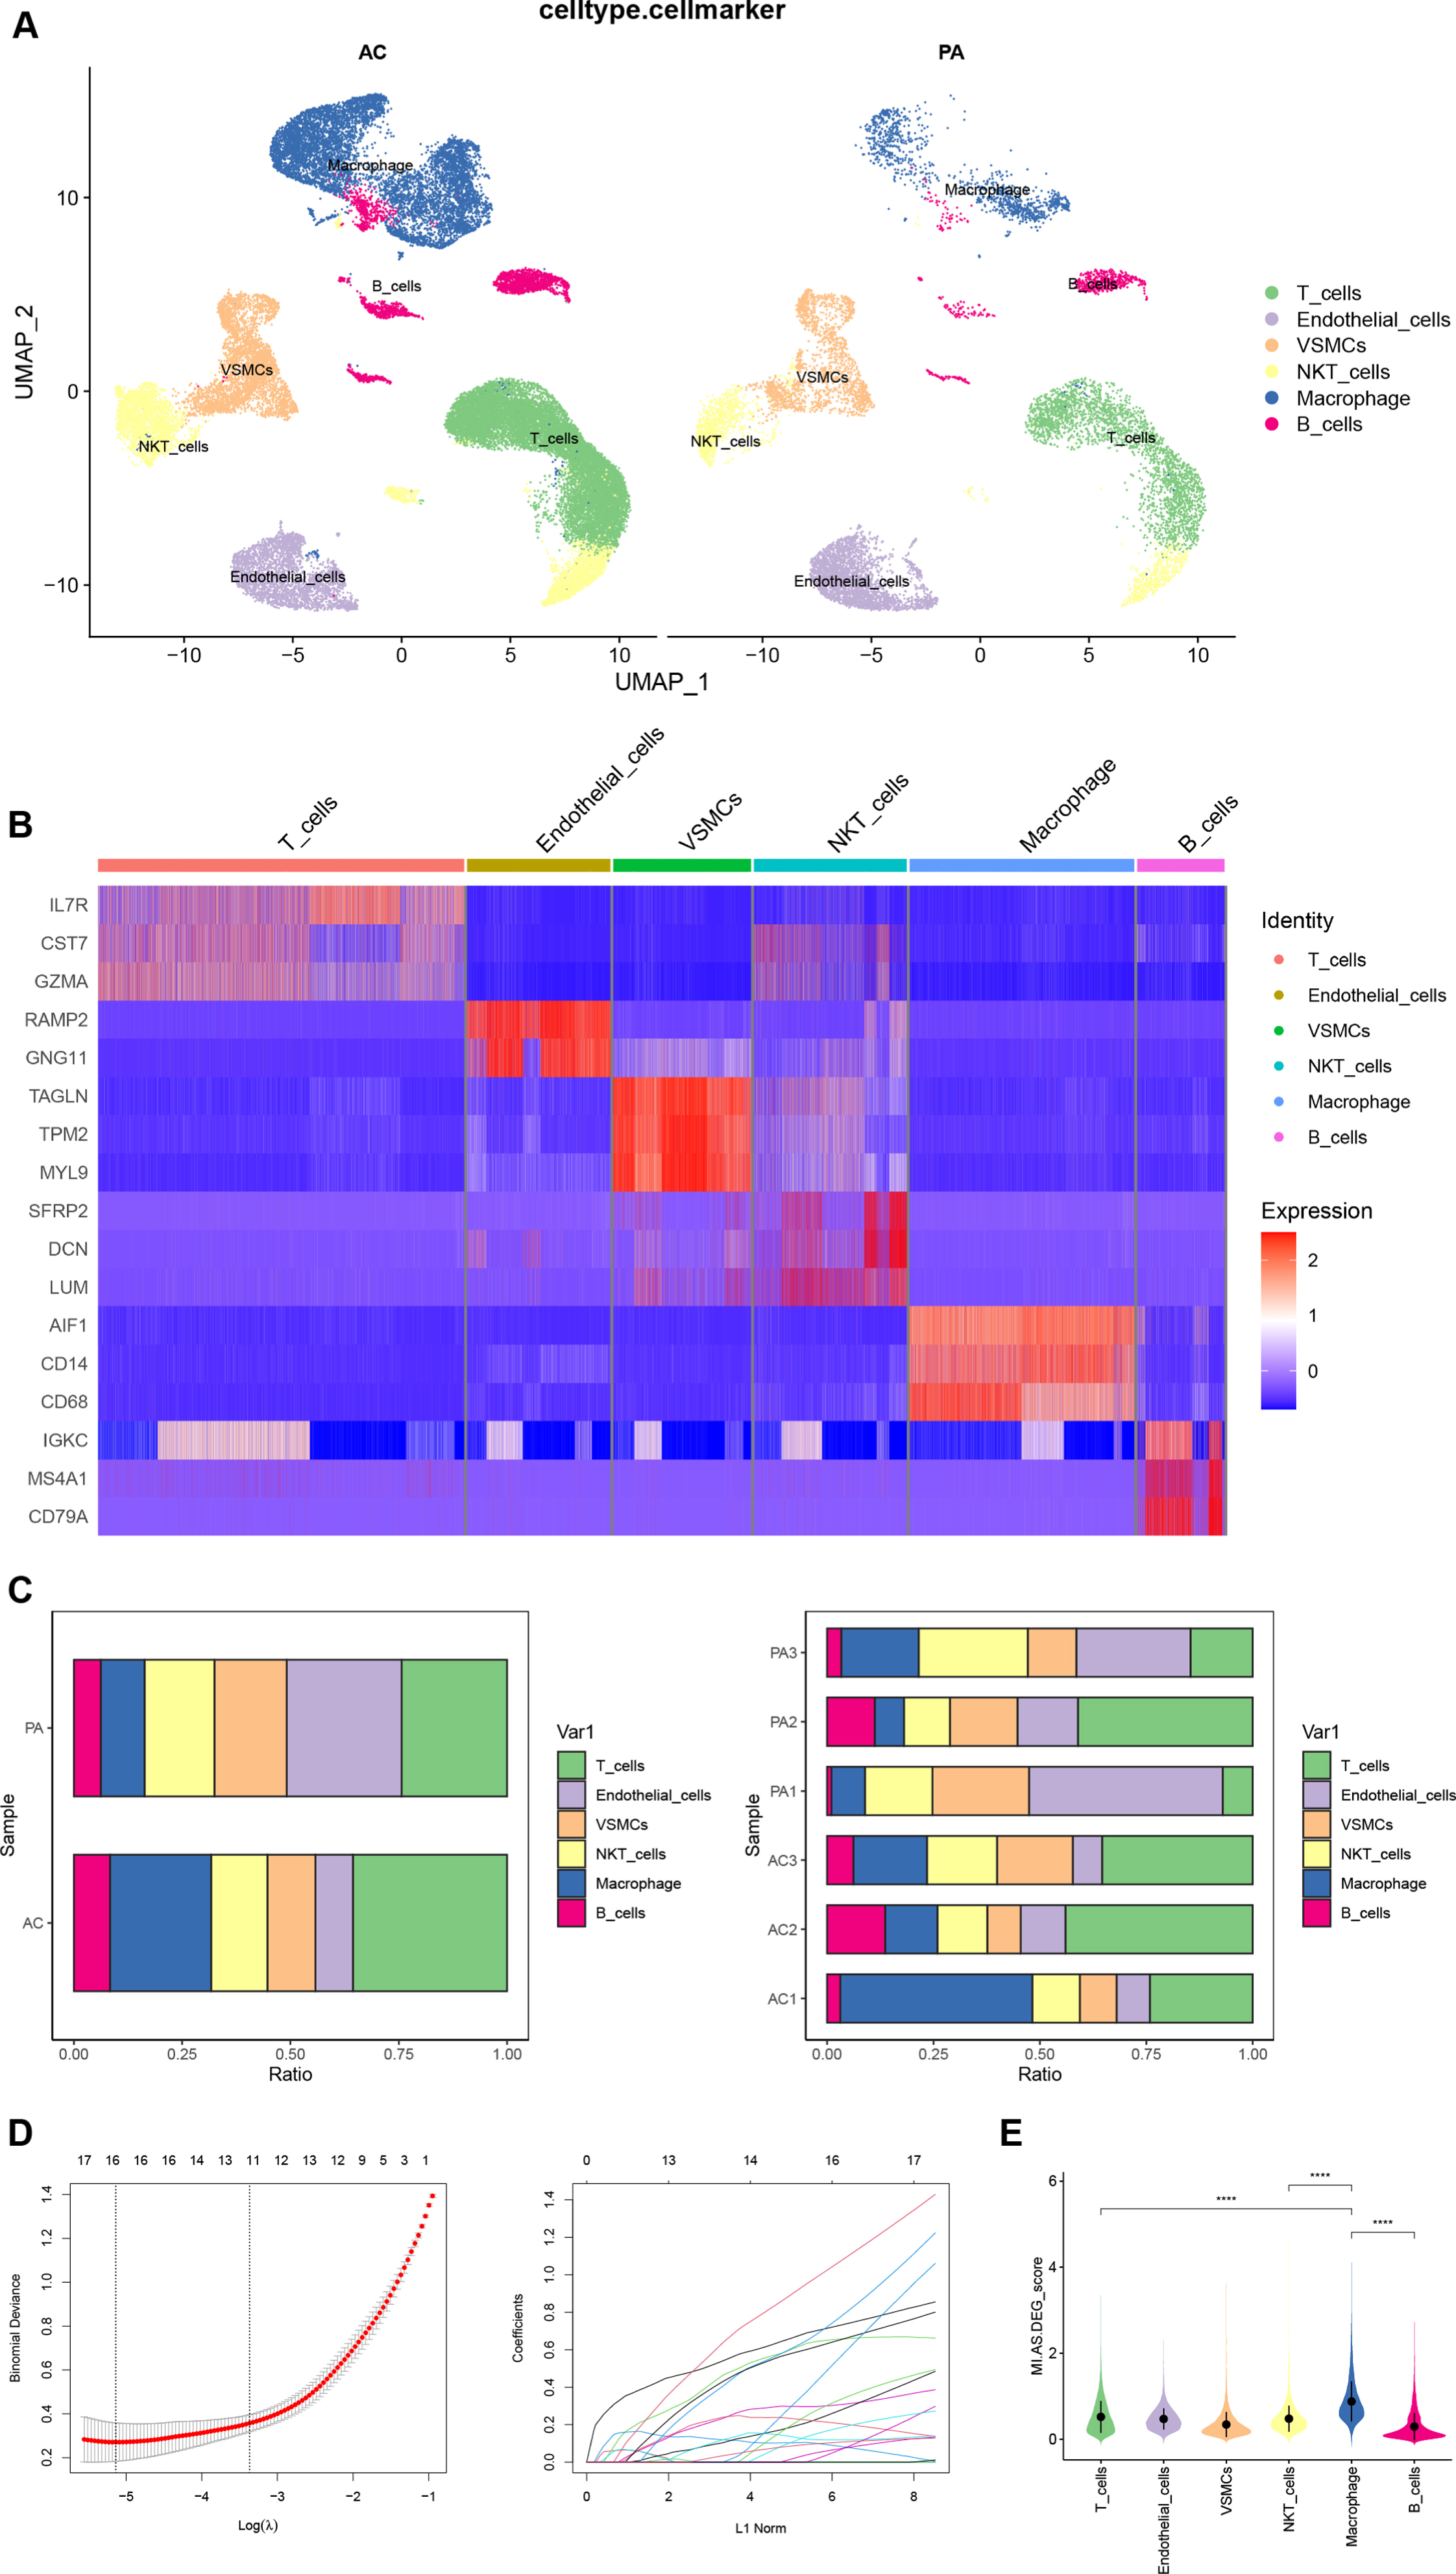 A) Manual annotation of cell clusters in CA with reference to previous studies. B) The heatmap shows good specificity of the cellular marker genes. C) The bars depict the percentage of each cell type in each group and patient. D) Biomarkers screening in the LASSO model. The number of genes (n = 16) corresponding to the lowest point of the curve was the most suitable for MI diagnosis. E) The violin plot demonstrates the expression of DEGs between CA and MI in each cell cluster. CA, carotid atherosclerosis; MI, myocardial infarction.